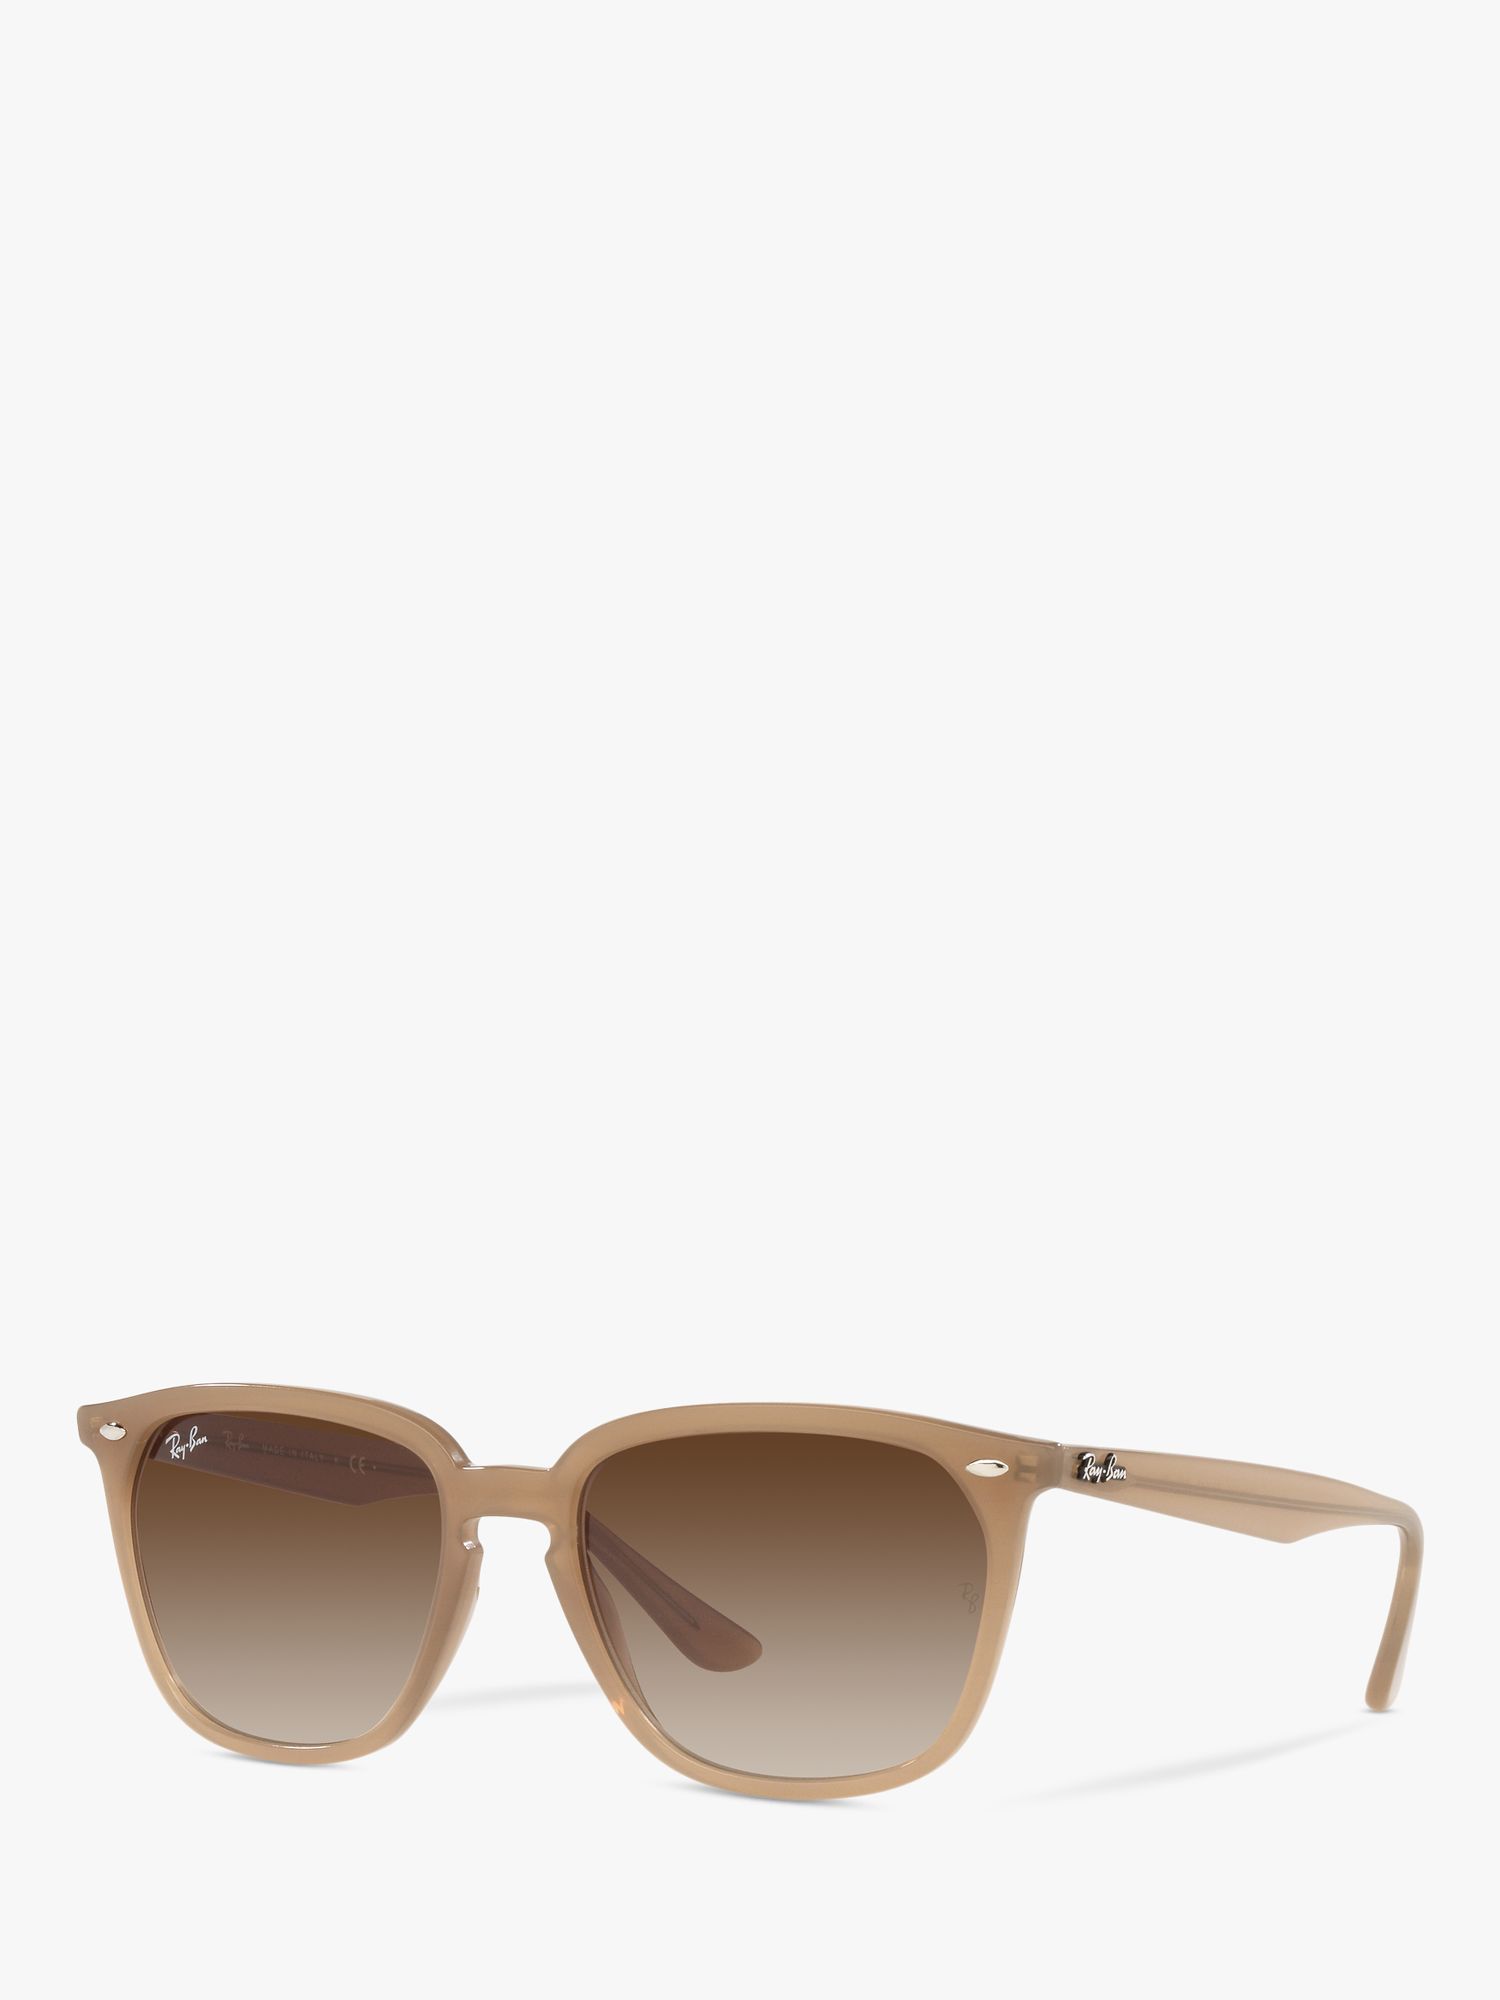 Ray-Ban RB4362 Unisex Square Sunglasses, Light Brown/Brown Gradient